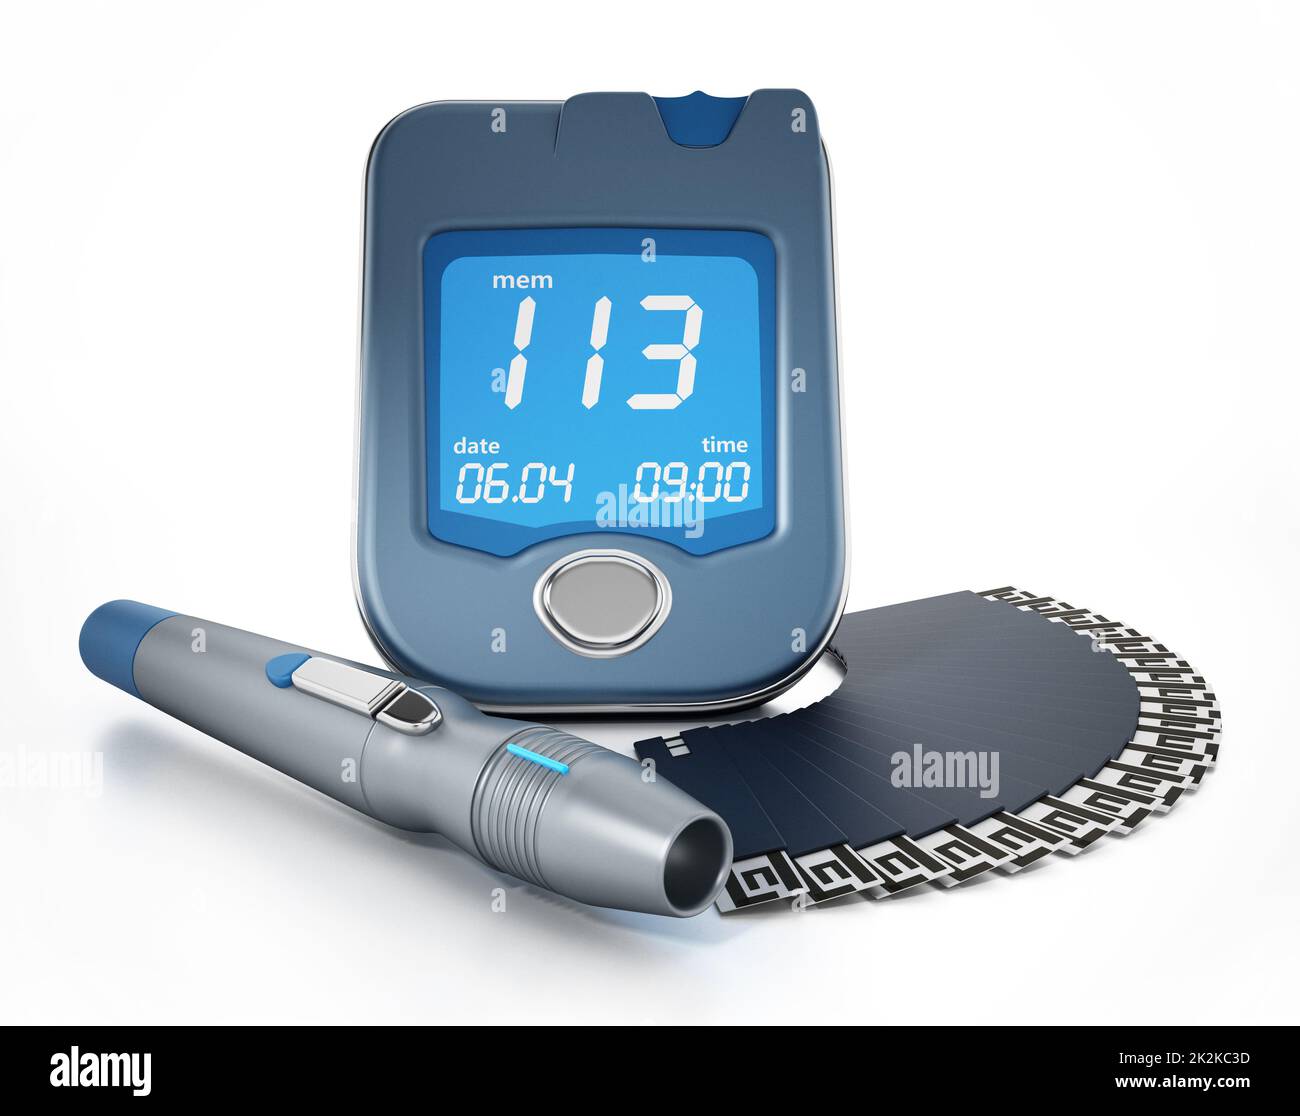 Blood glucose meter with strips isolated on white background. 3D illustration Stock Photo